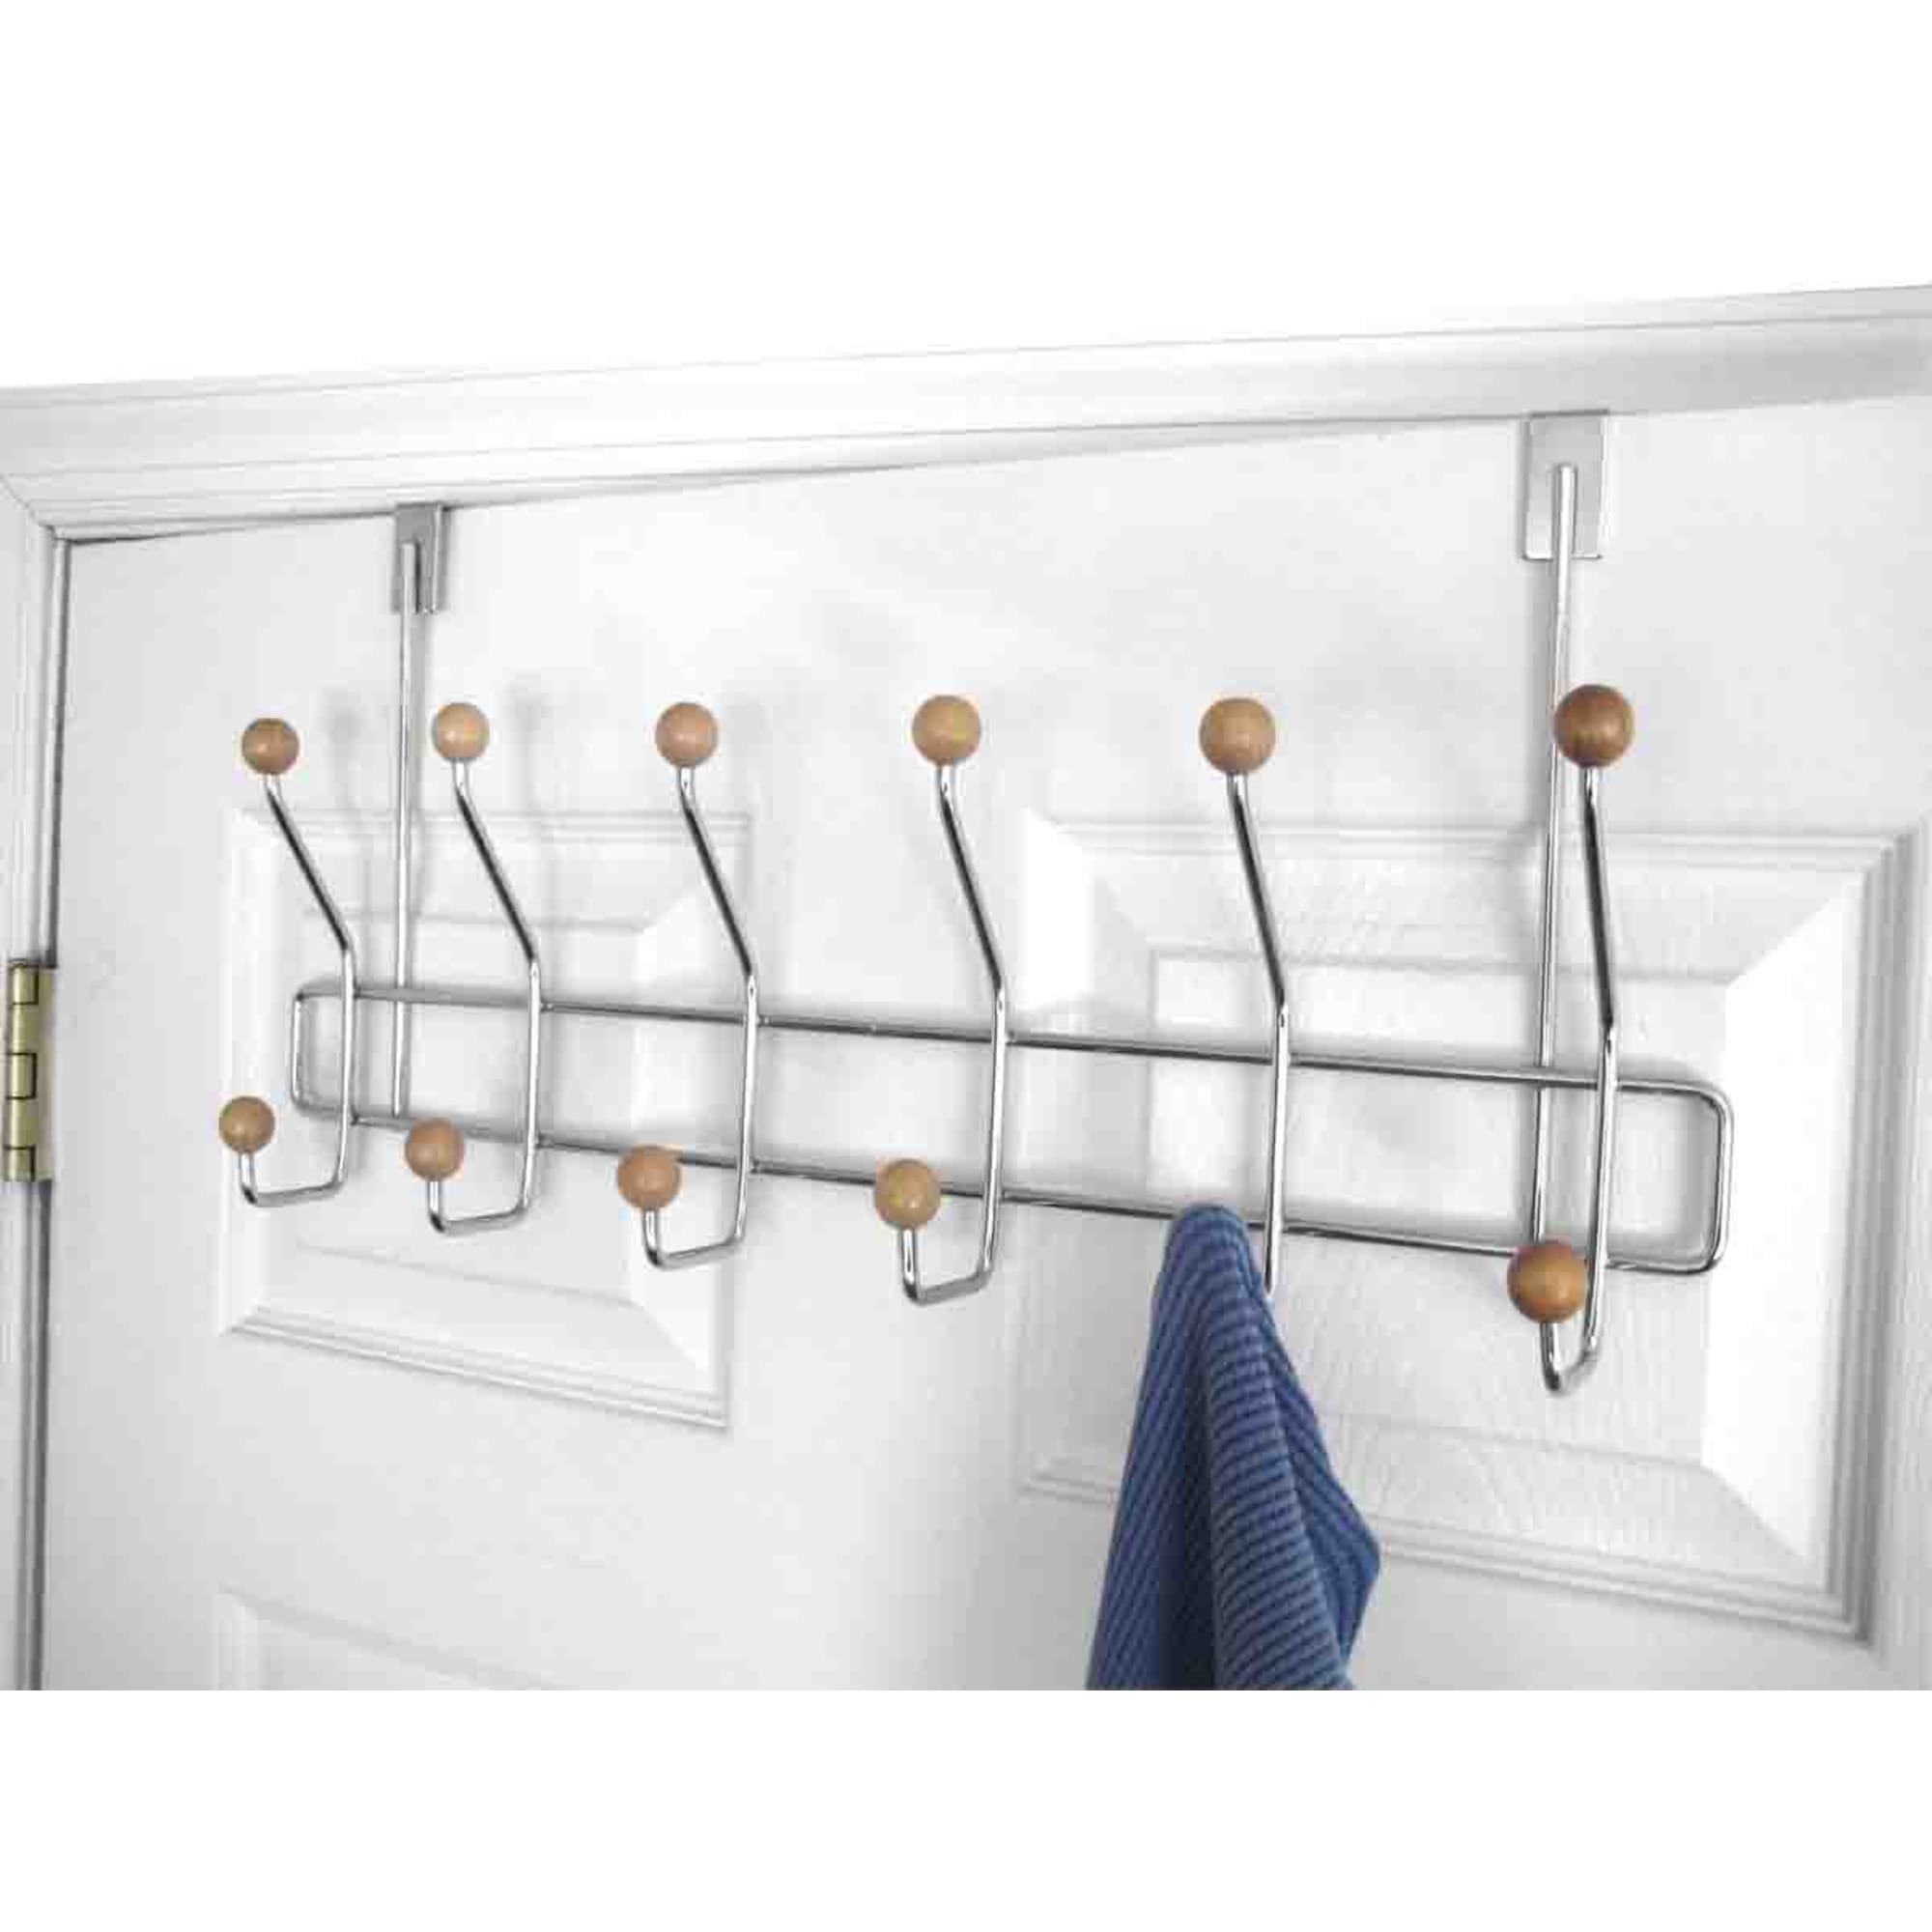 Home Basics Chrome Plated Steel Over the Door 6-Hook Hanging Rack $6.00 EACH, CASE PACK OF 12